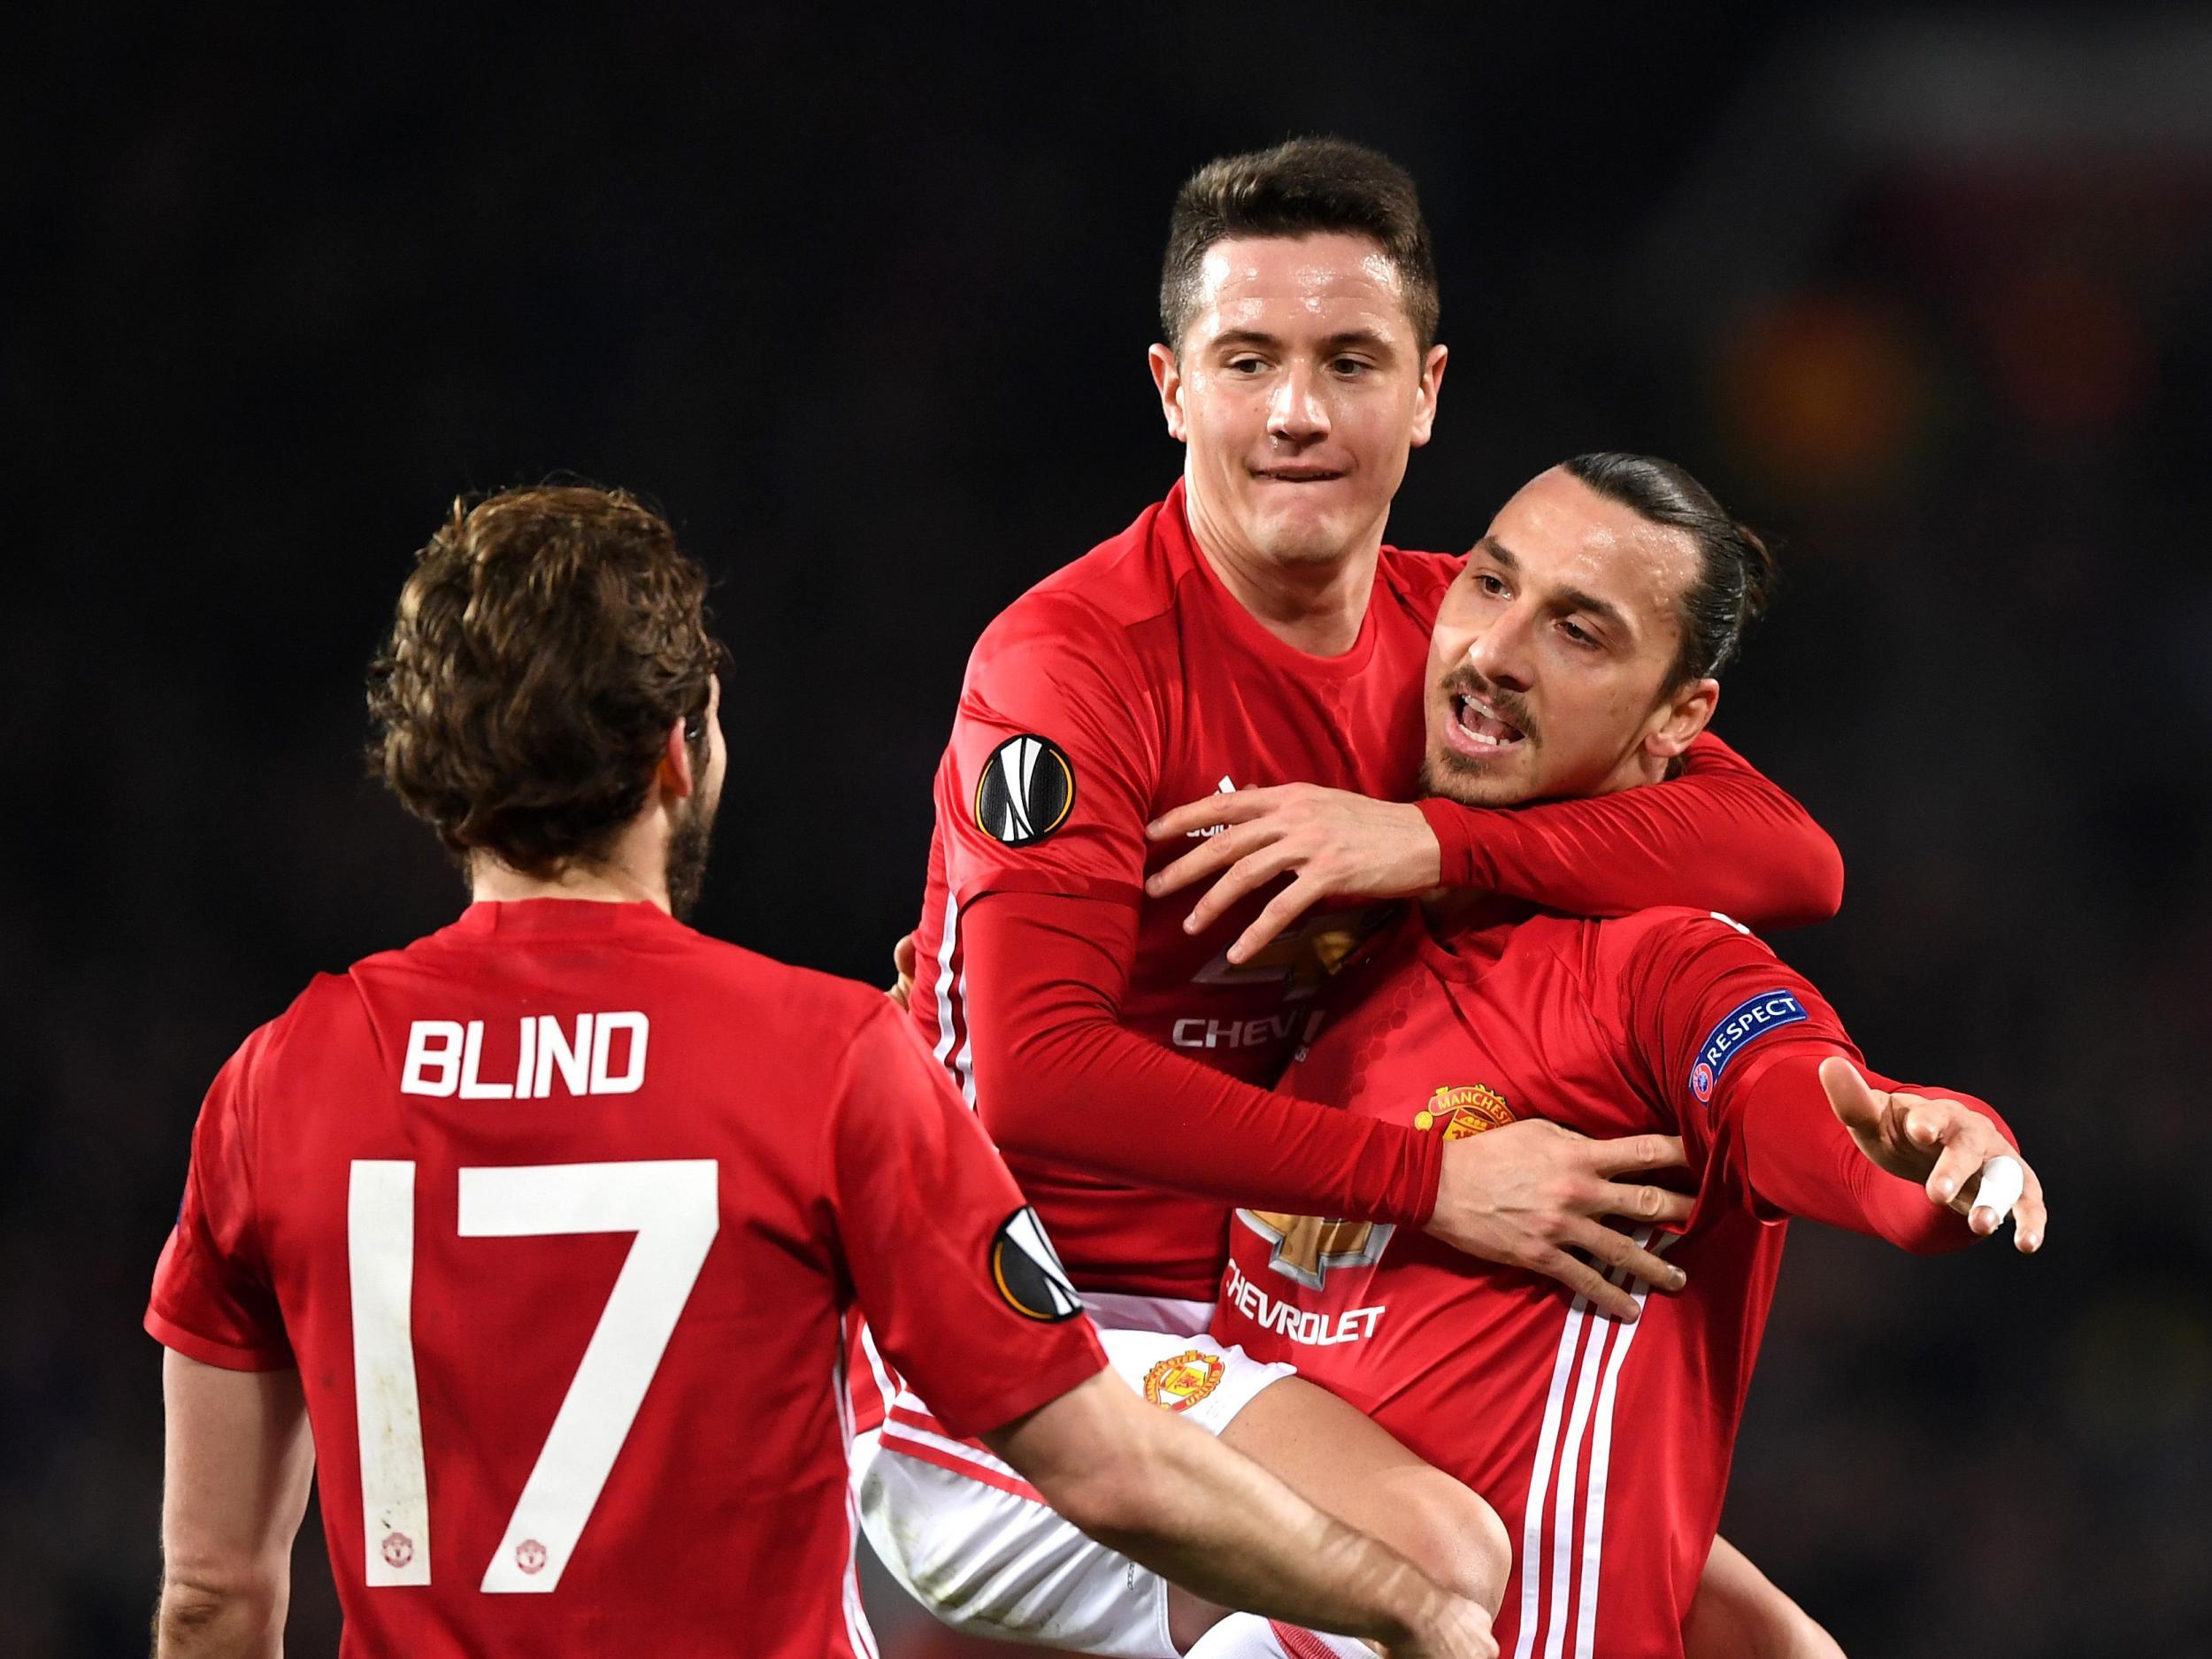 Blind and Herrera celebrate with Ibrahimovic after his opening goal